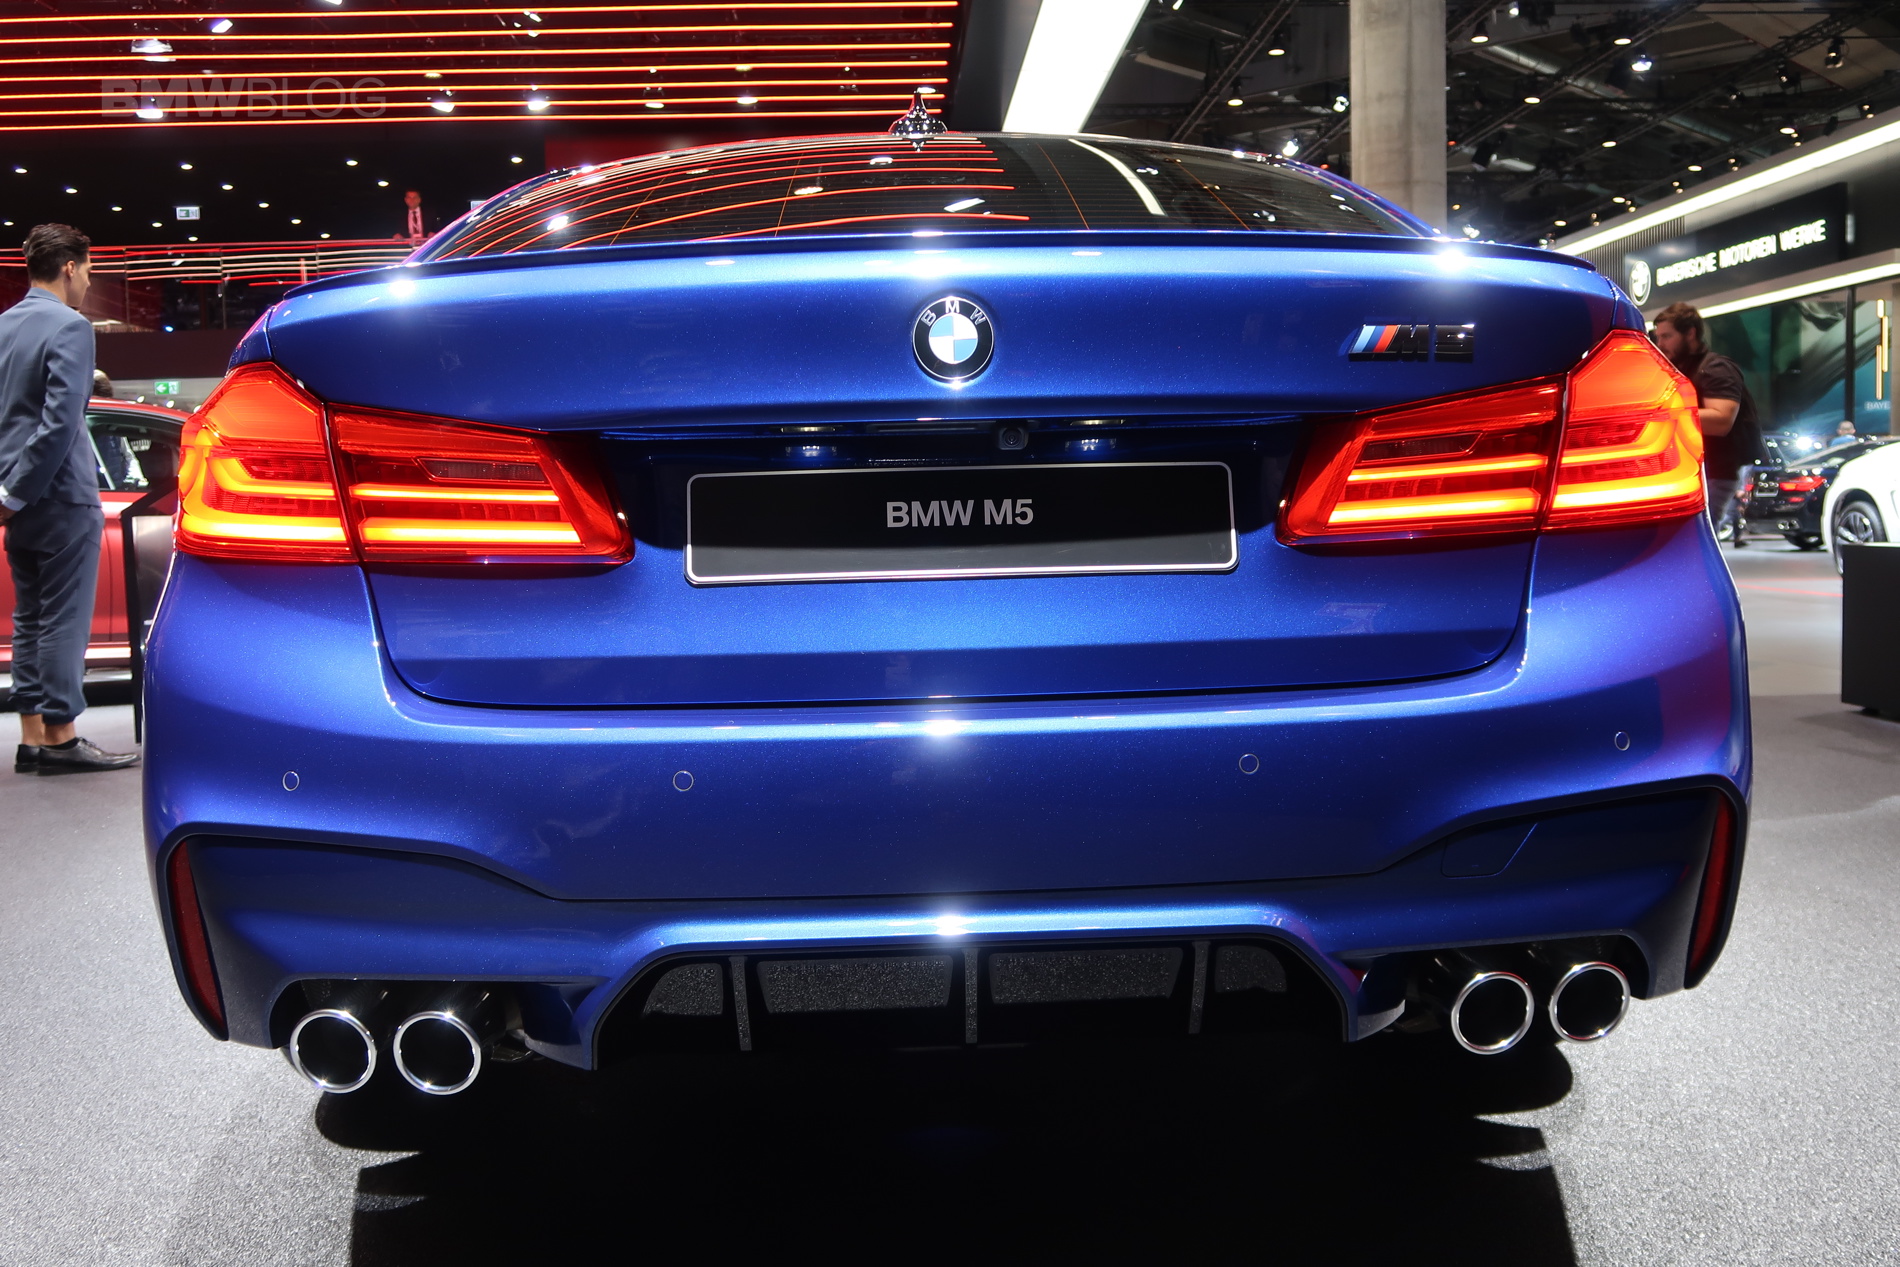 As for suspension, steering and handling, the BMW M5 has been given a signi...